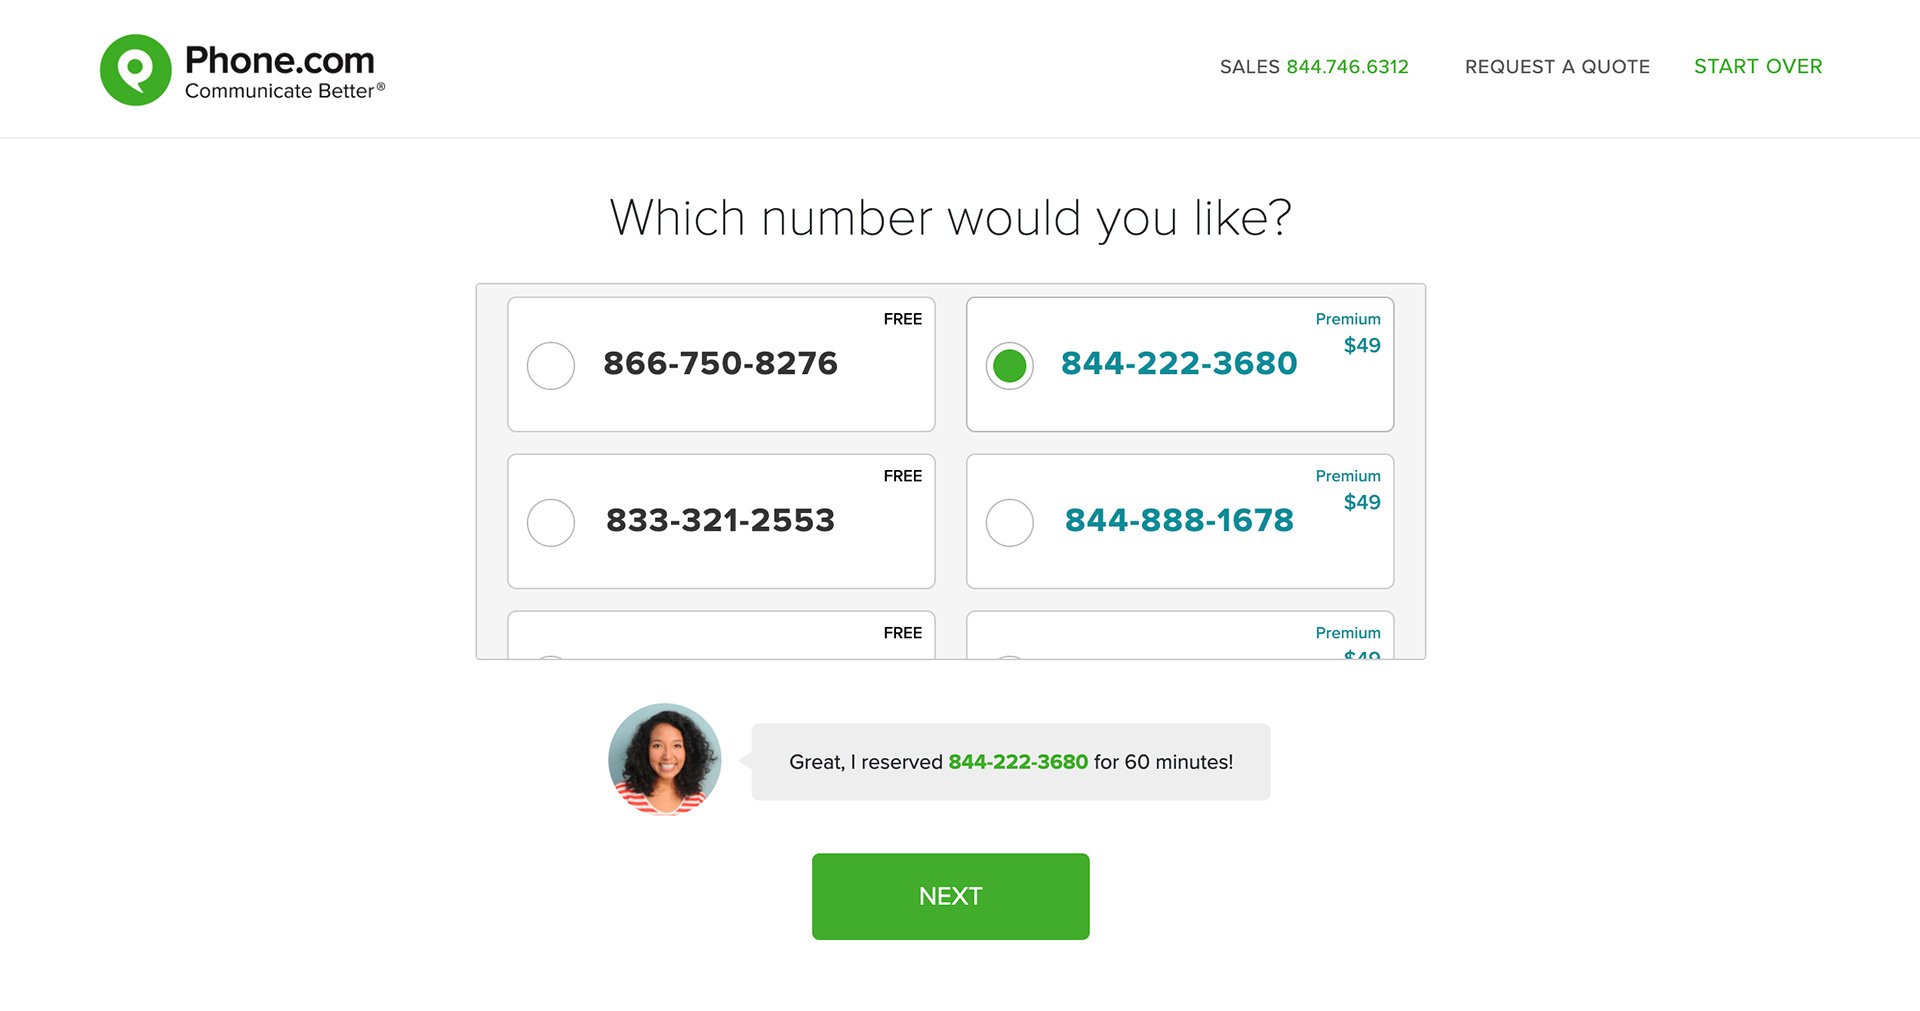 phone.com toll free number selection